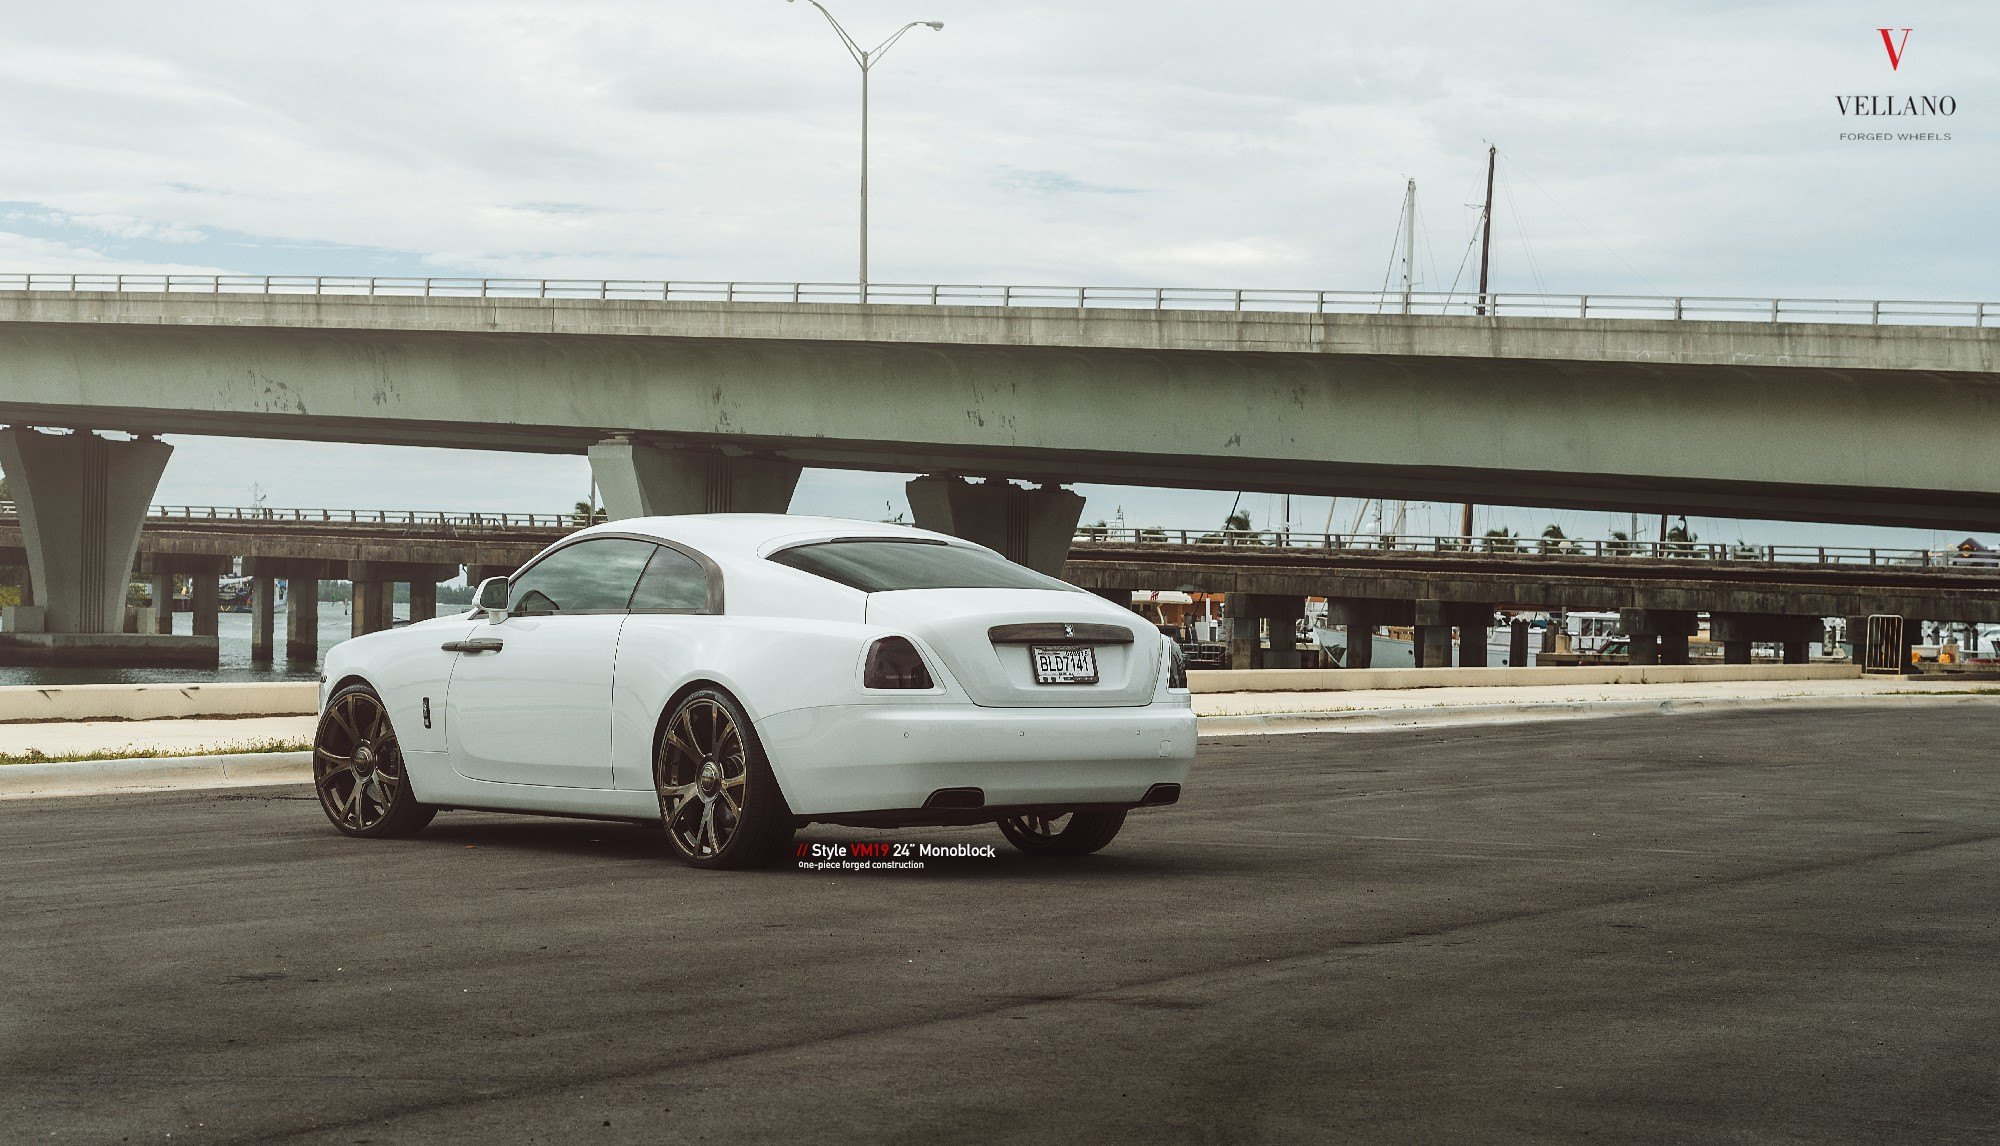 White Rolls Royce Wraith with Red Smoke Taillights - Photo by Vellano